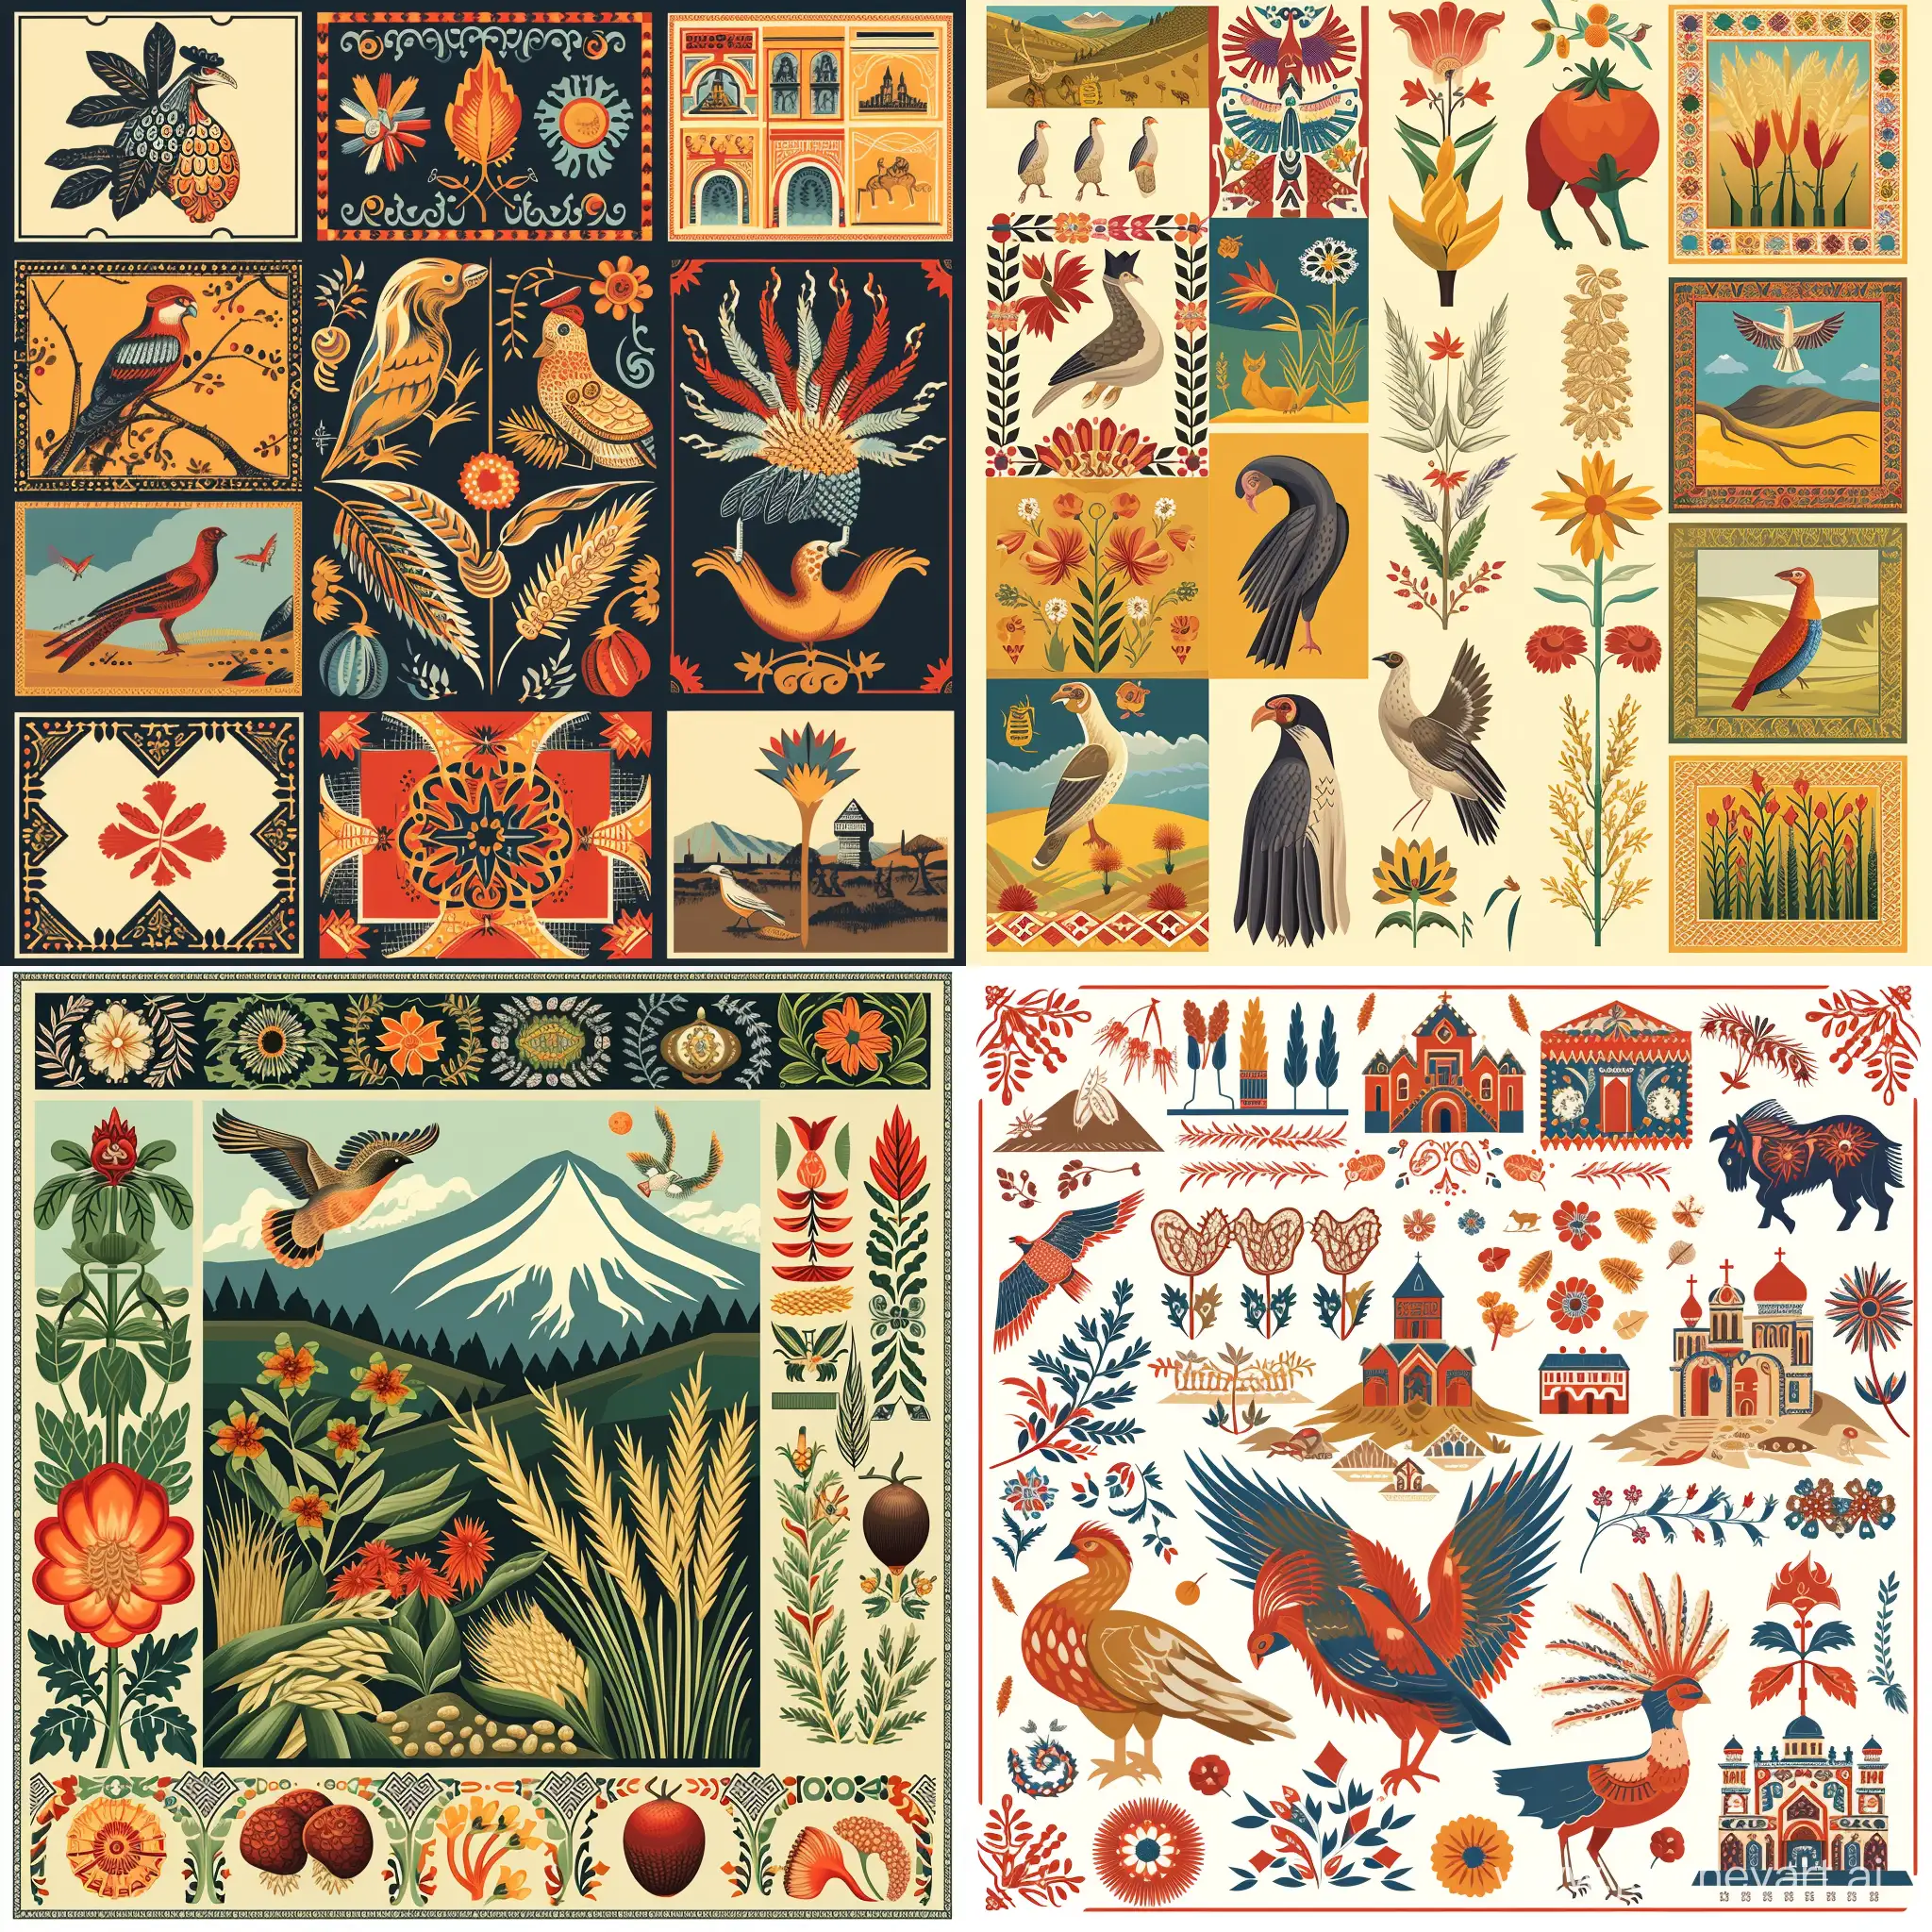 ArmenianInspired-Grains-Label-Vibrant-Designs-with-Traditional-Patterns-and-Local-Symbols